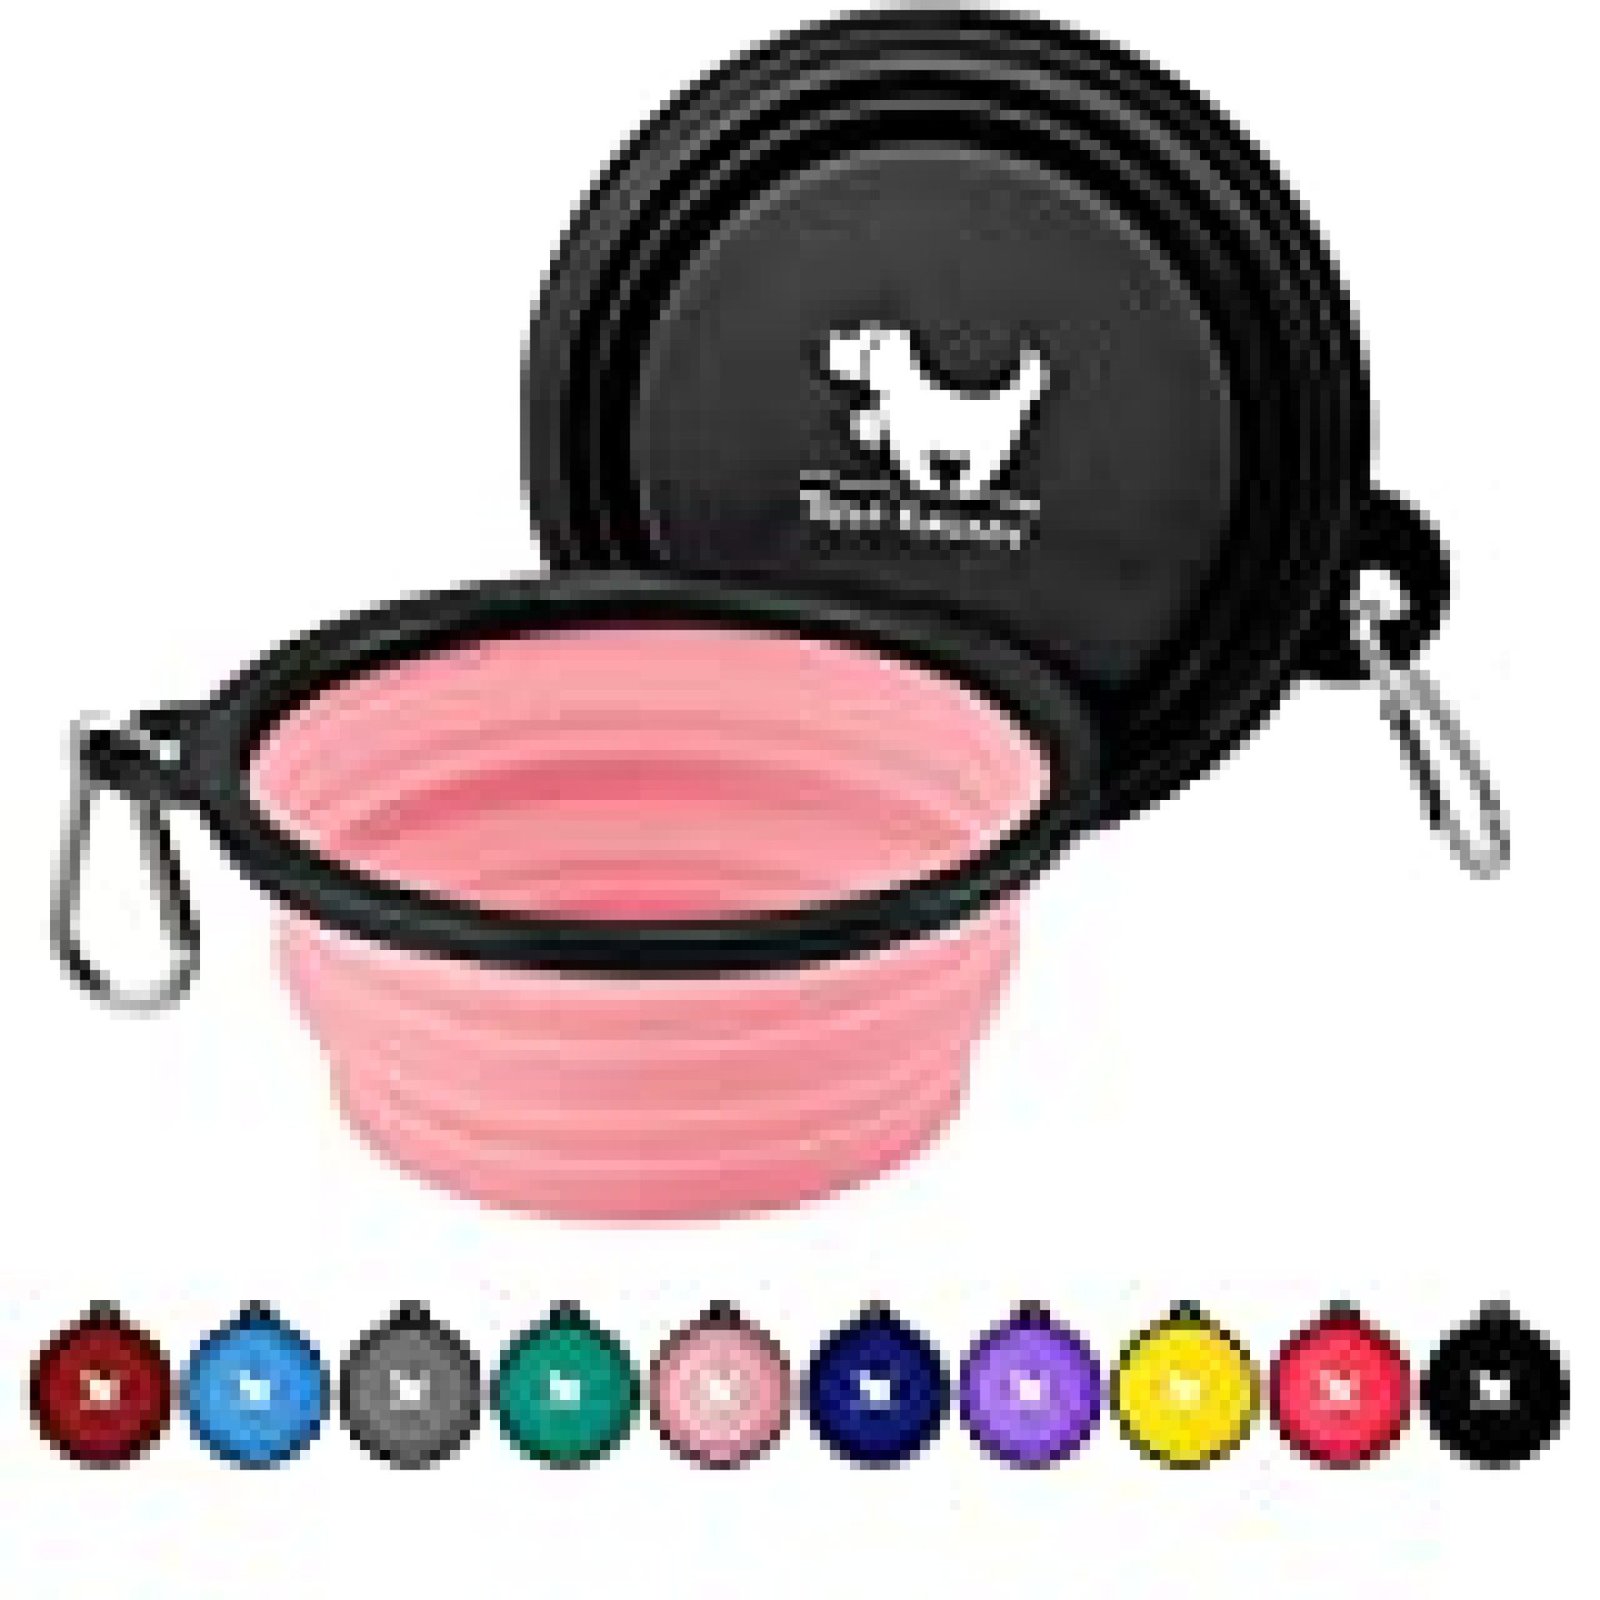 dogs travel water bowl